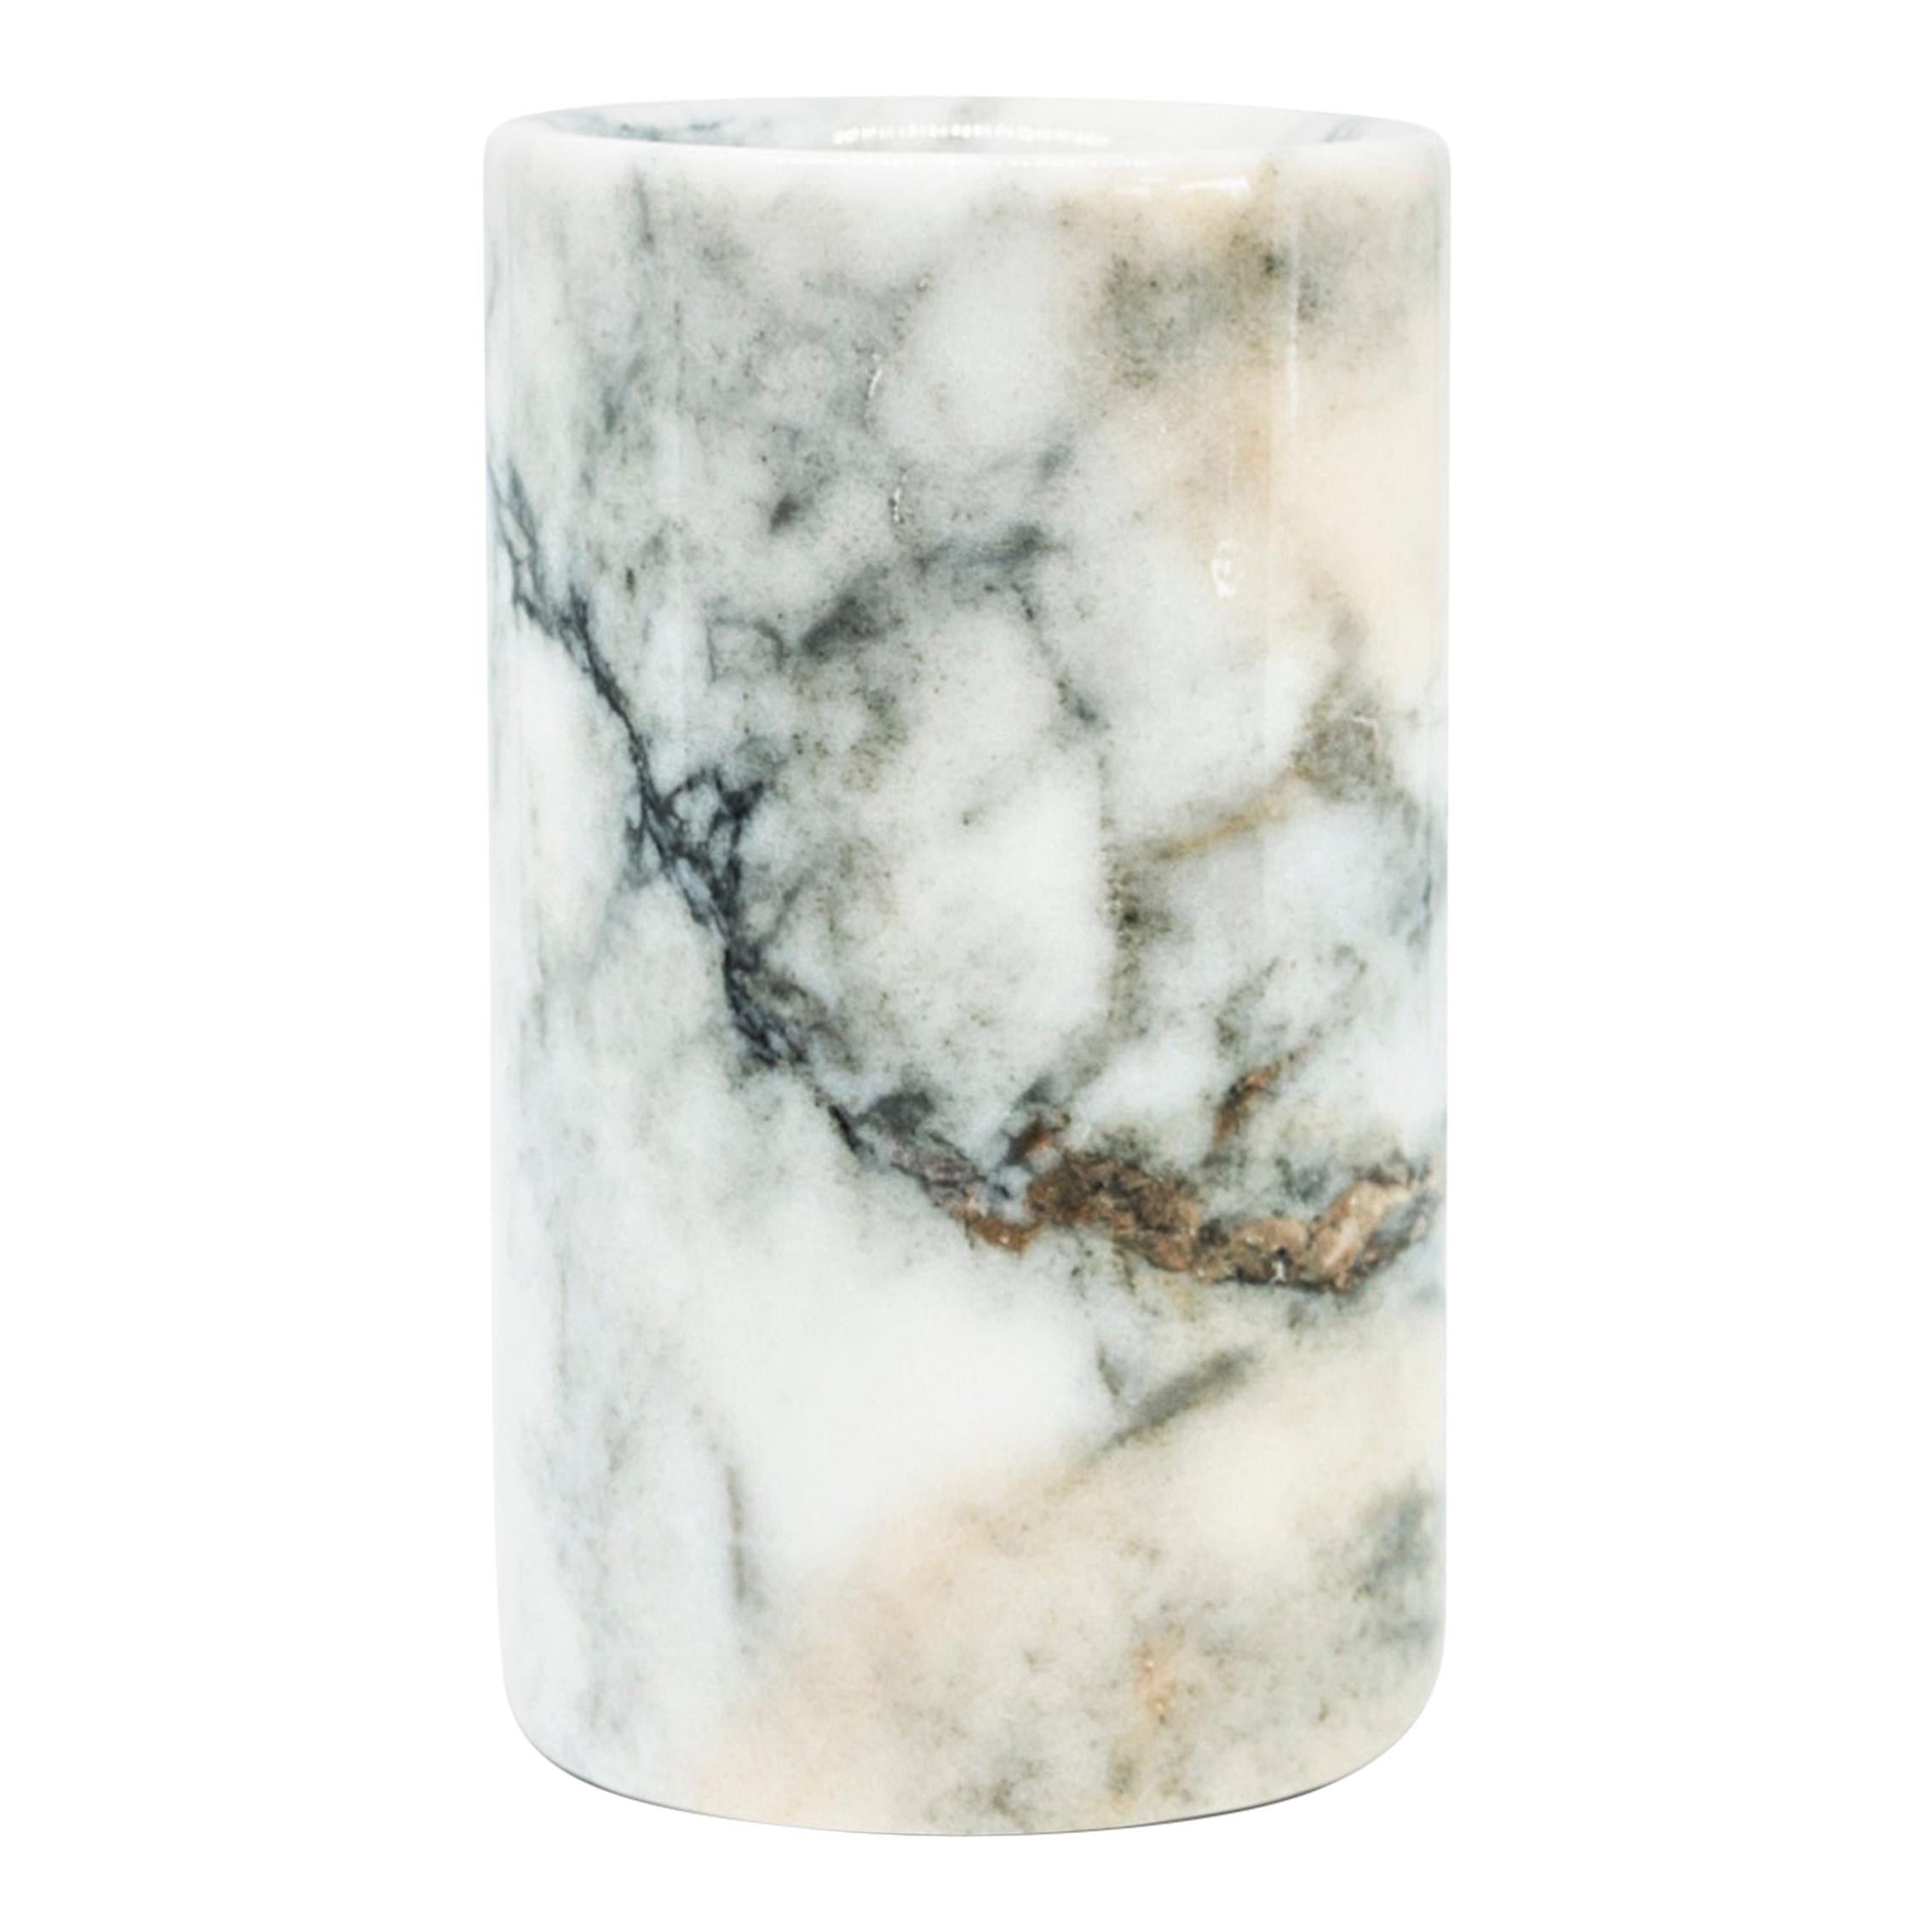 A rounded shape toothbrush holder in Paonazzo marble.
Each piece is in a way unique (every marble block is different in veins and shades) and handmade by Italian artisans specialized over generations in processing marble. Slight variations in